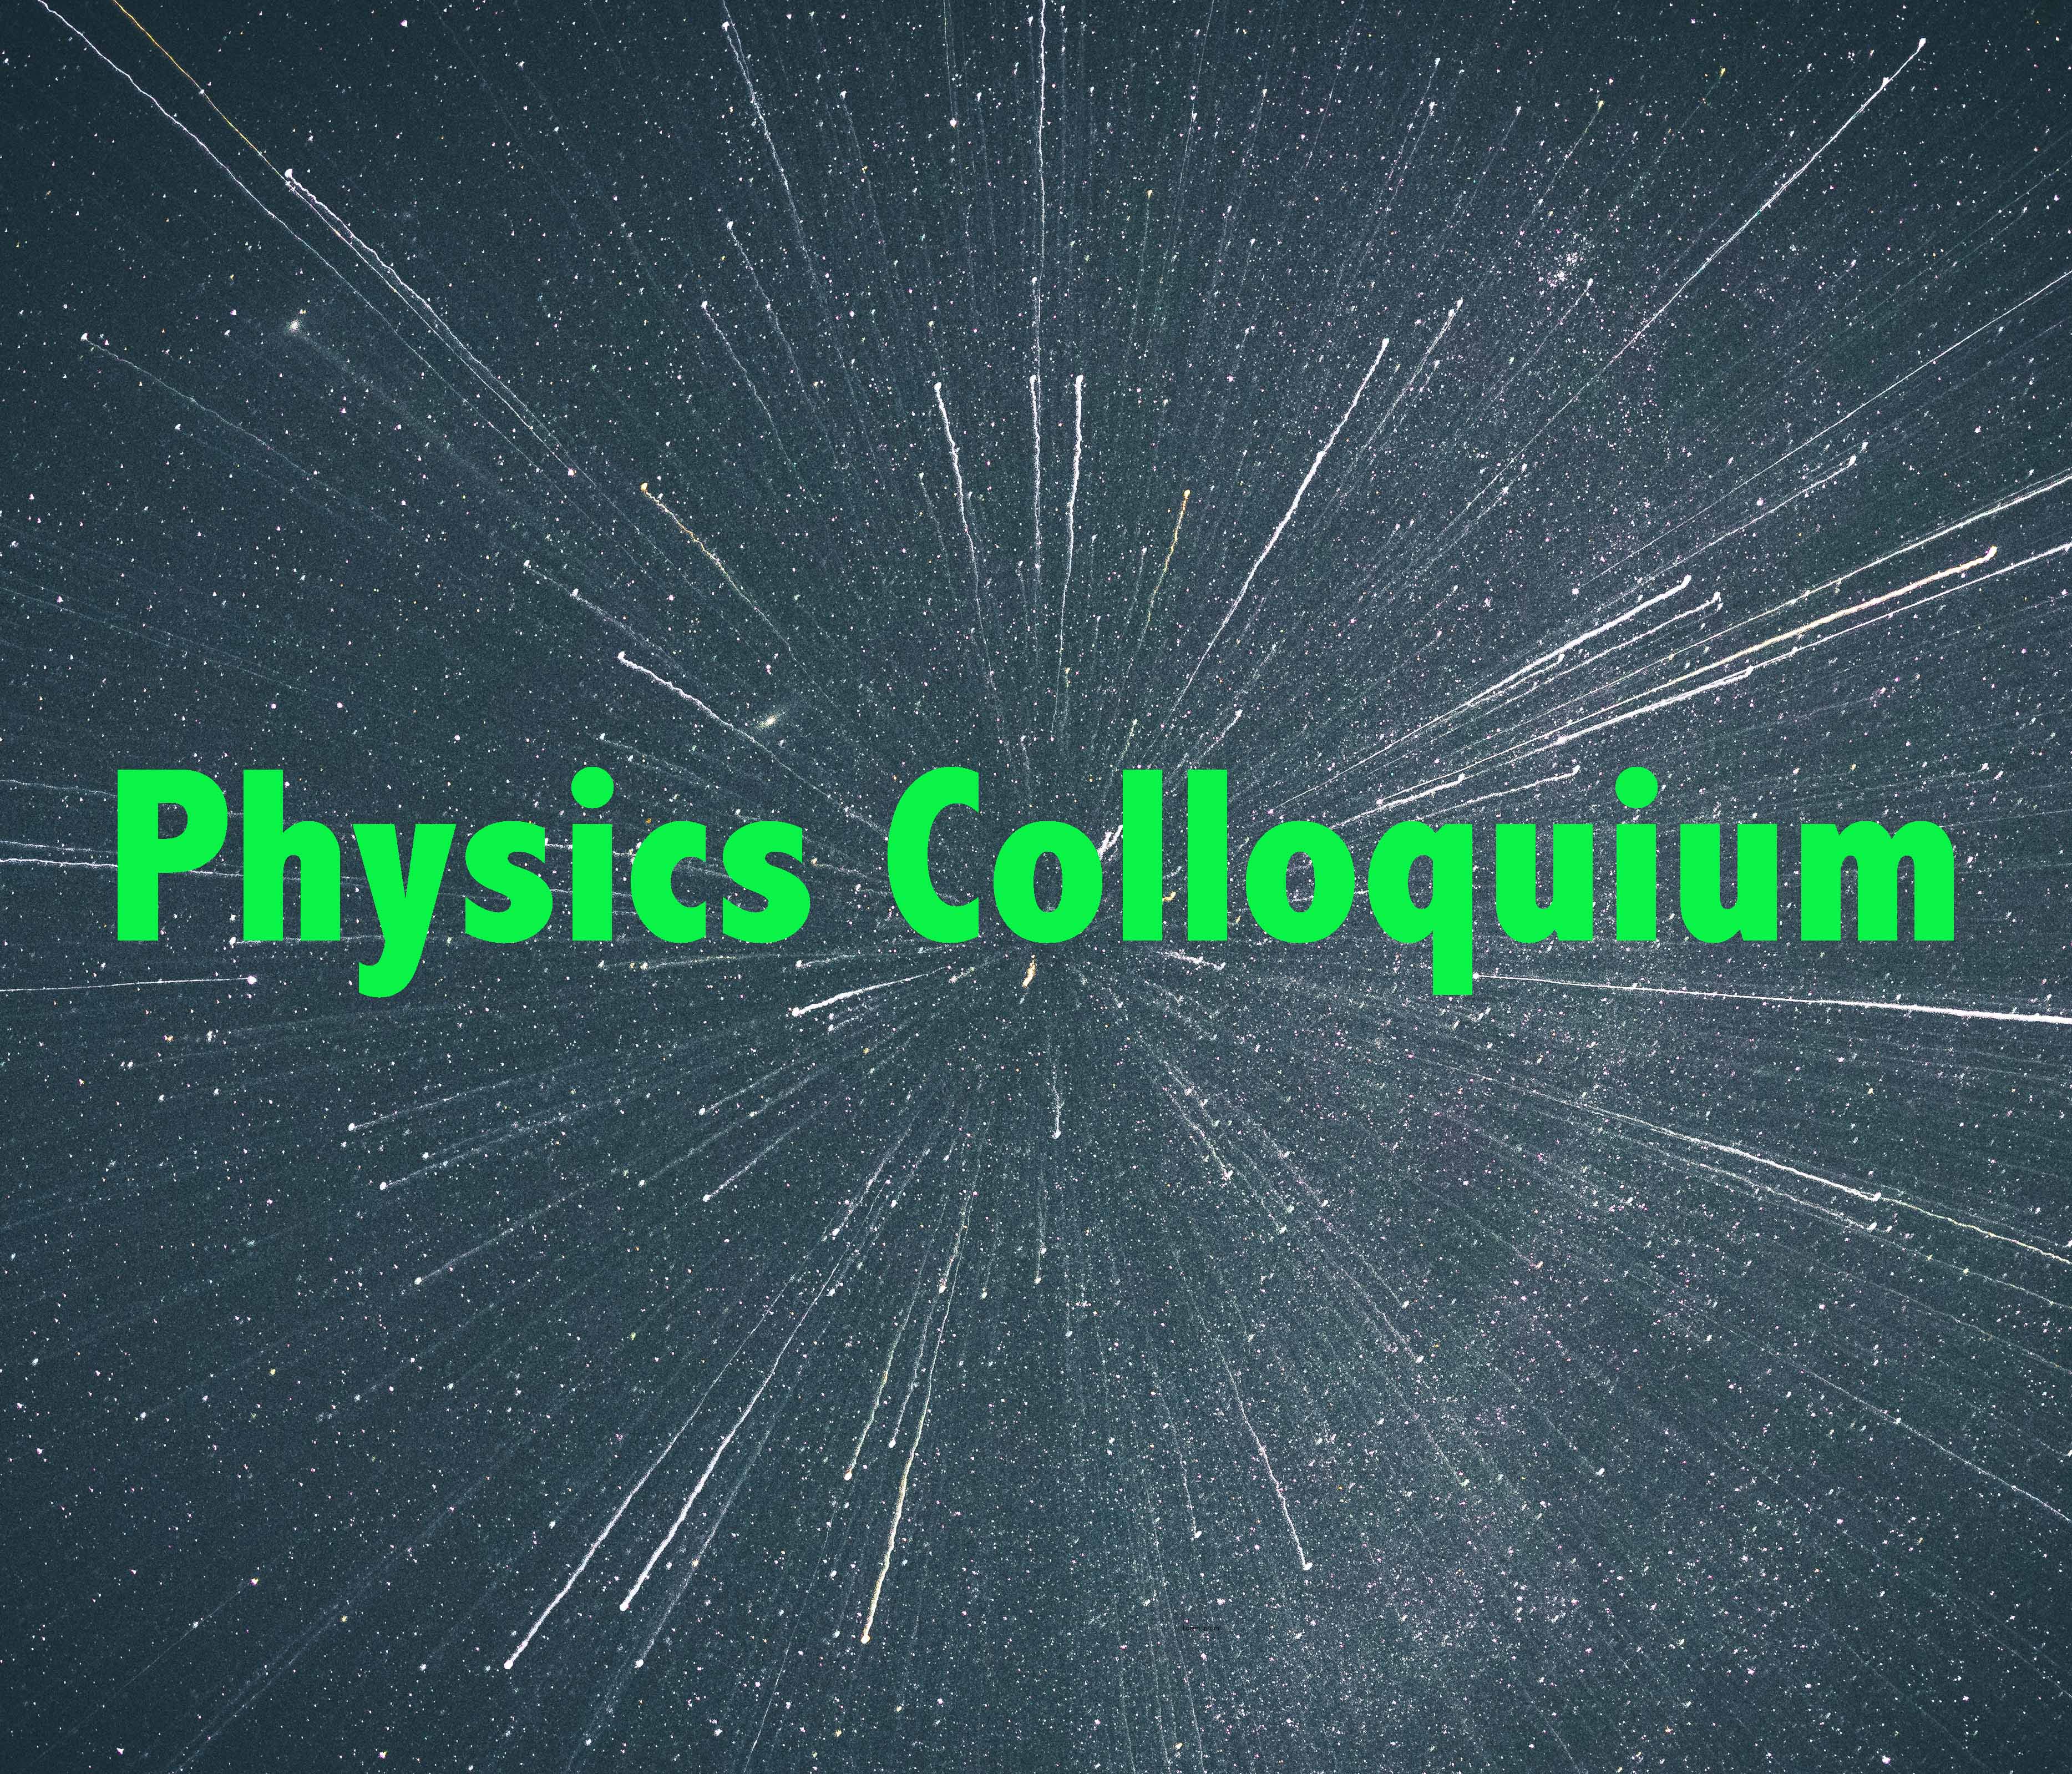 Text reads Physics colloquium with stars in the background